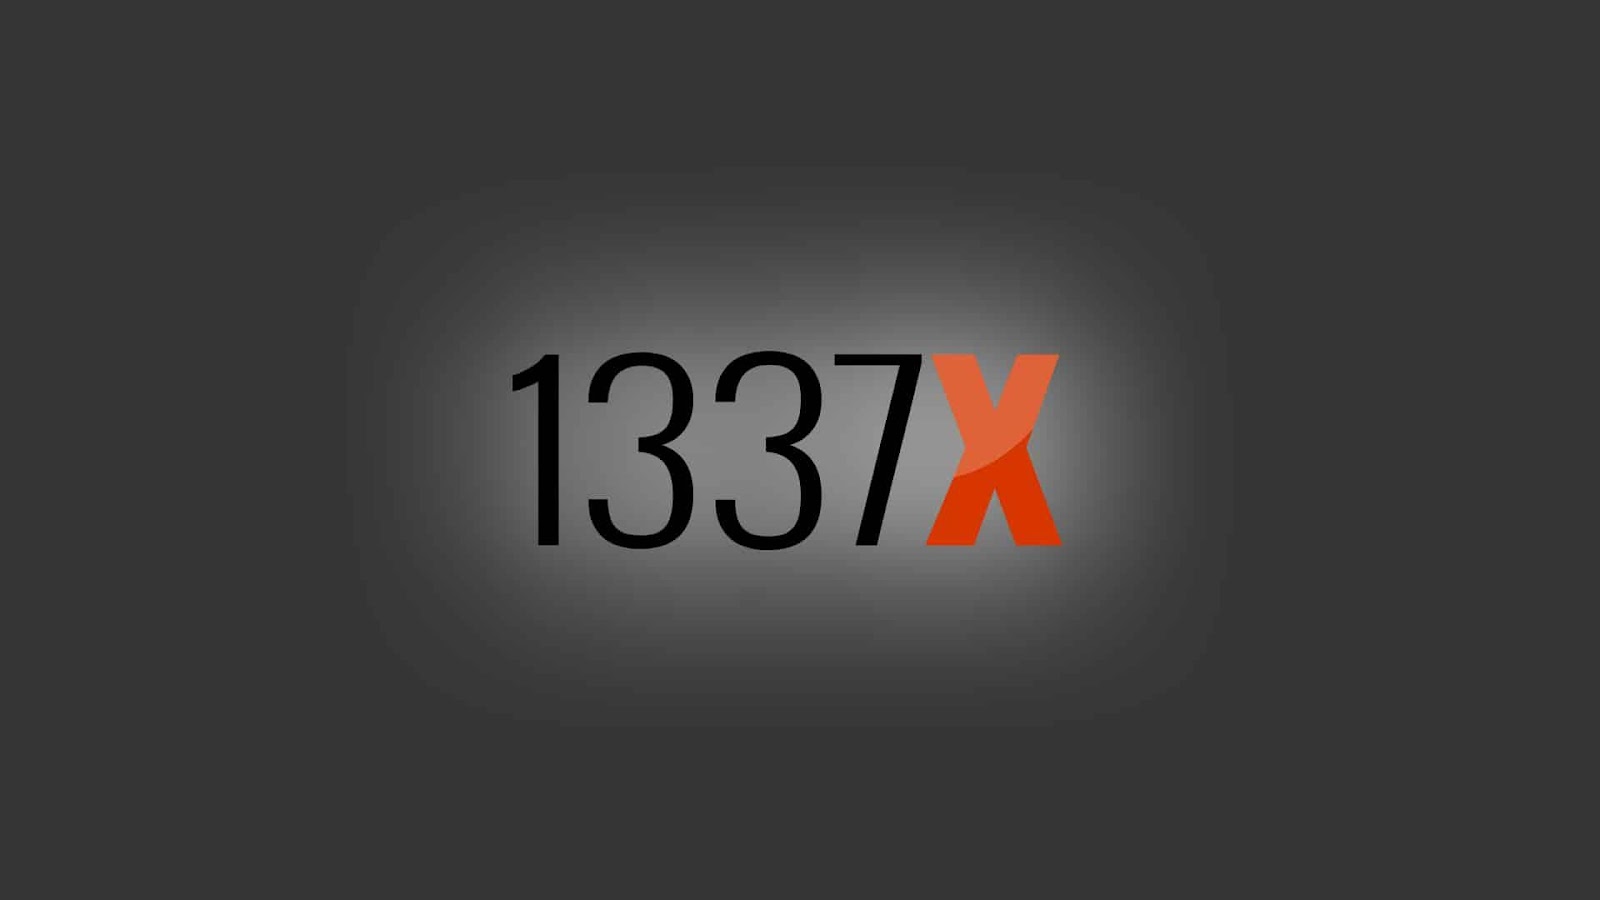 1337x Alternatives: Working Proxy List and Mirror Sites in 2021